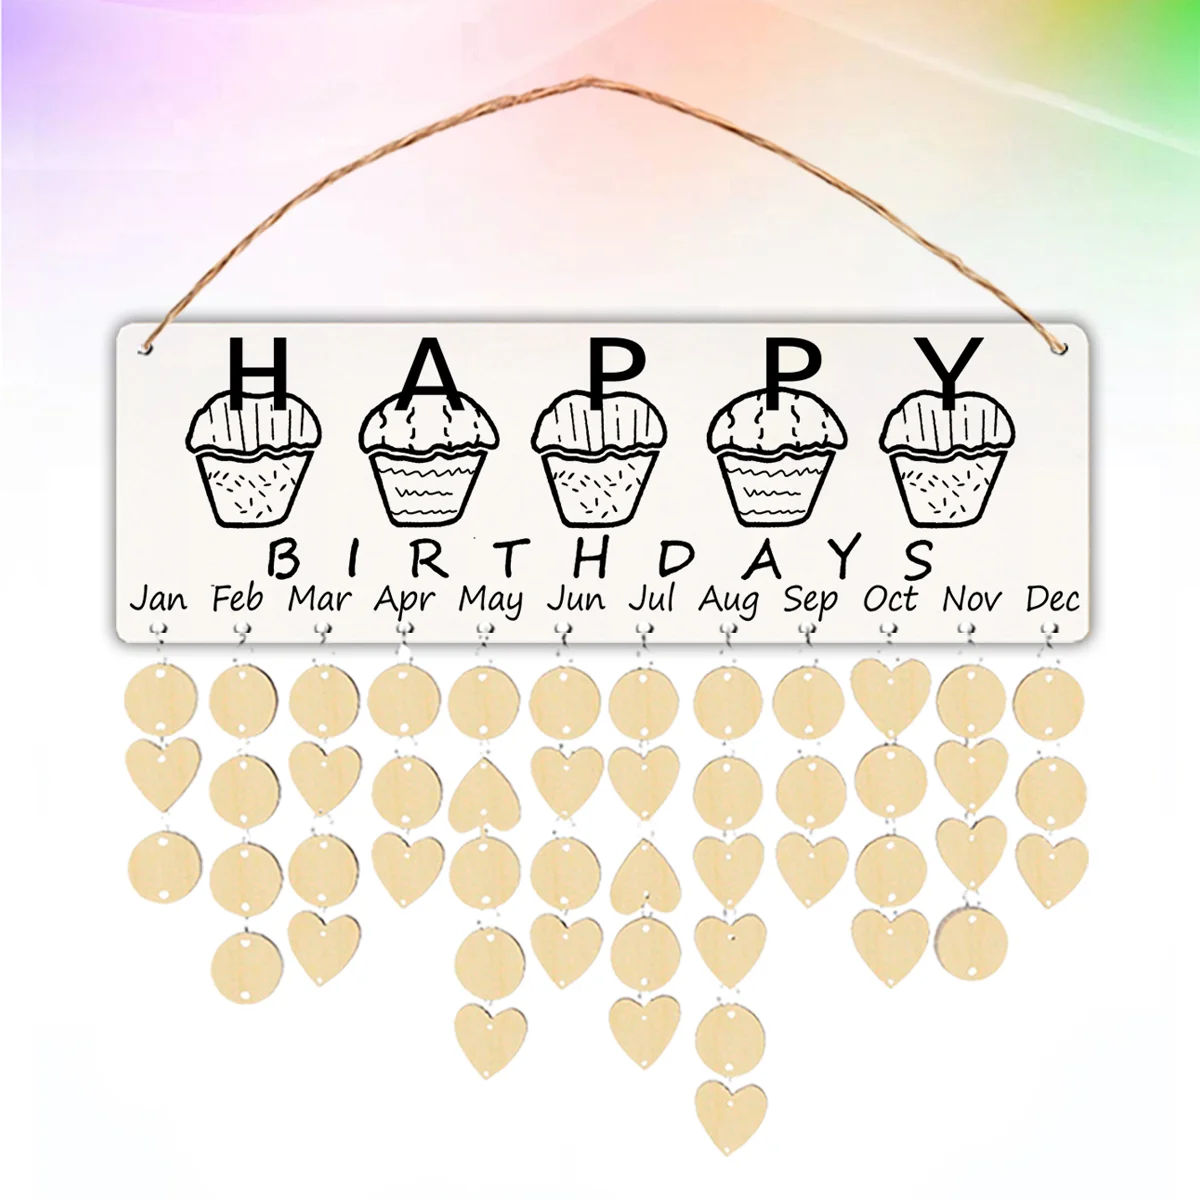 Wooden Birthday Reminder Board DIY Dates Reminder Sign Rope Hanging Events Anniversary Celebration Calendar Wall Plaque with a5 multi functional board shop recipe price label card milk coffee shop table menu sign holder board with clip